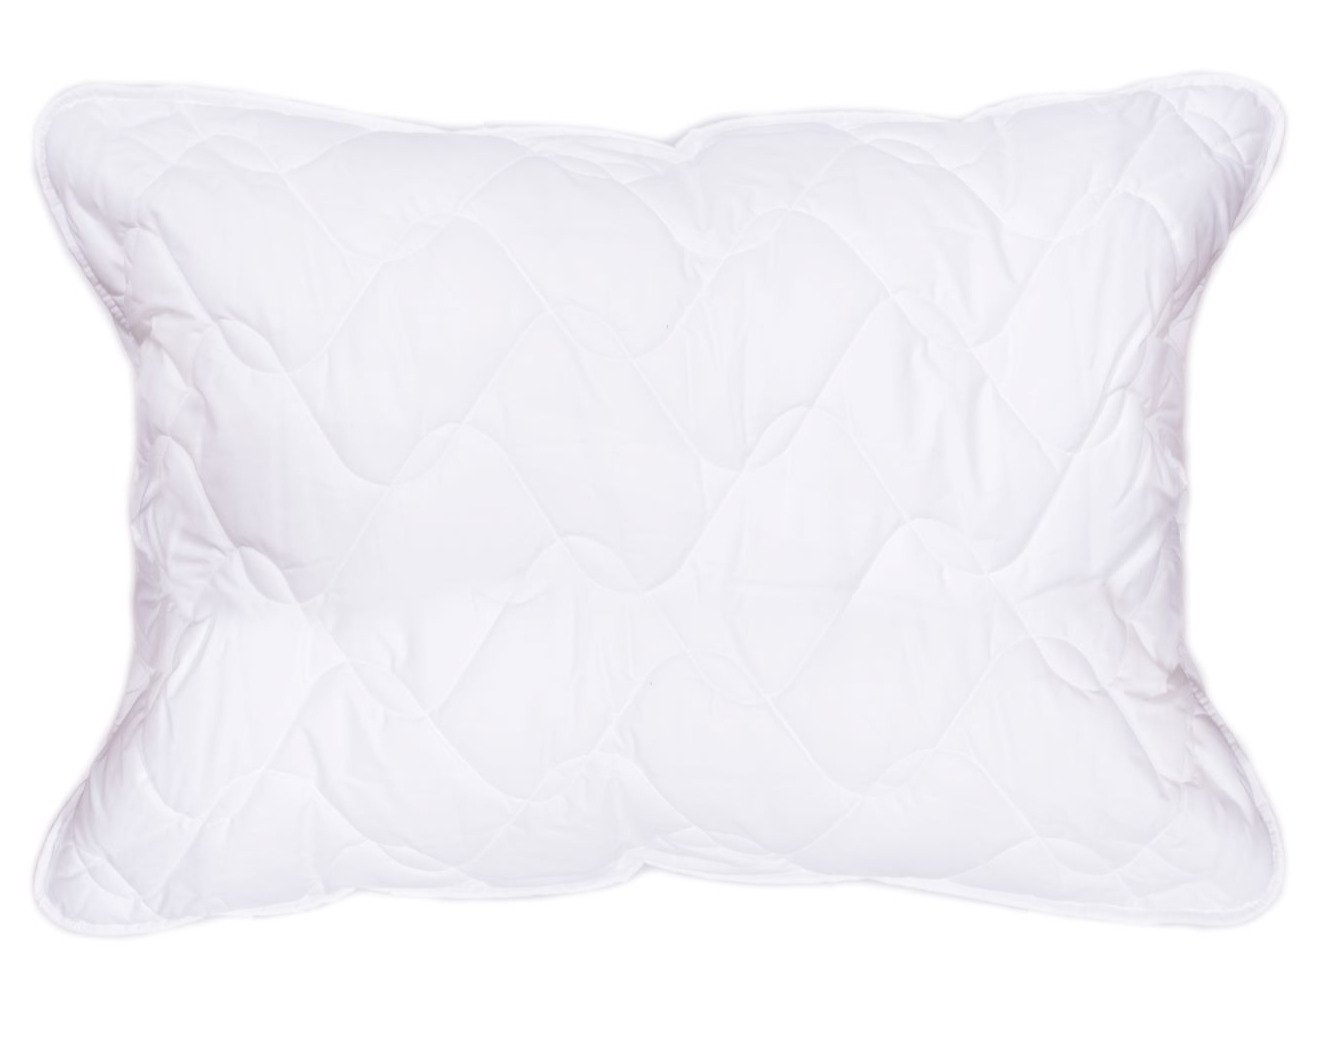 Med Plus medical pillow, washable on 95°C, with removable inner pillow, 70x90 cm